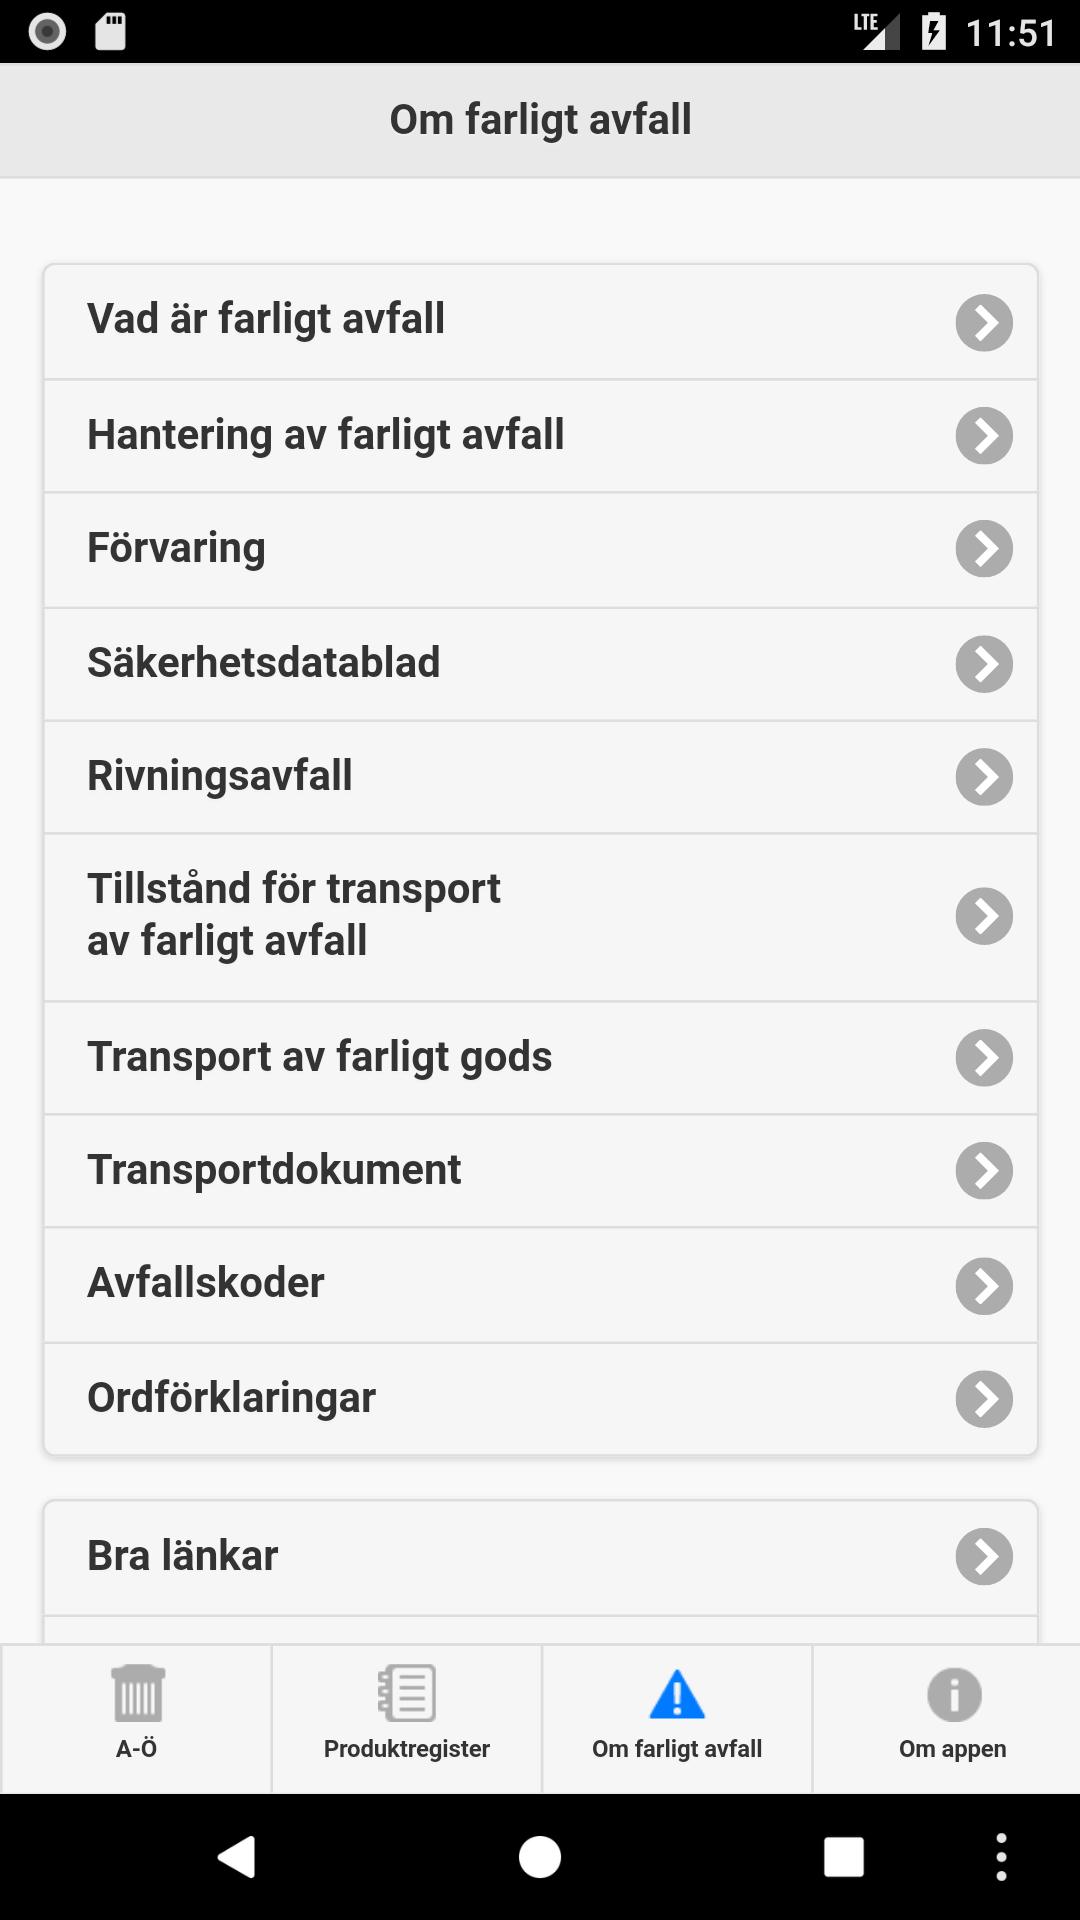 Farligt avfall for Android - APK Download